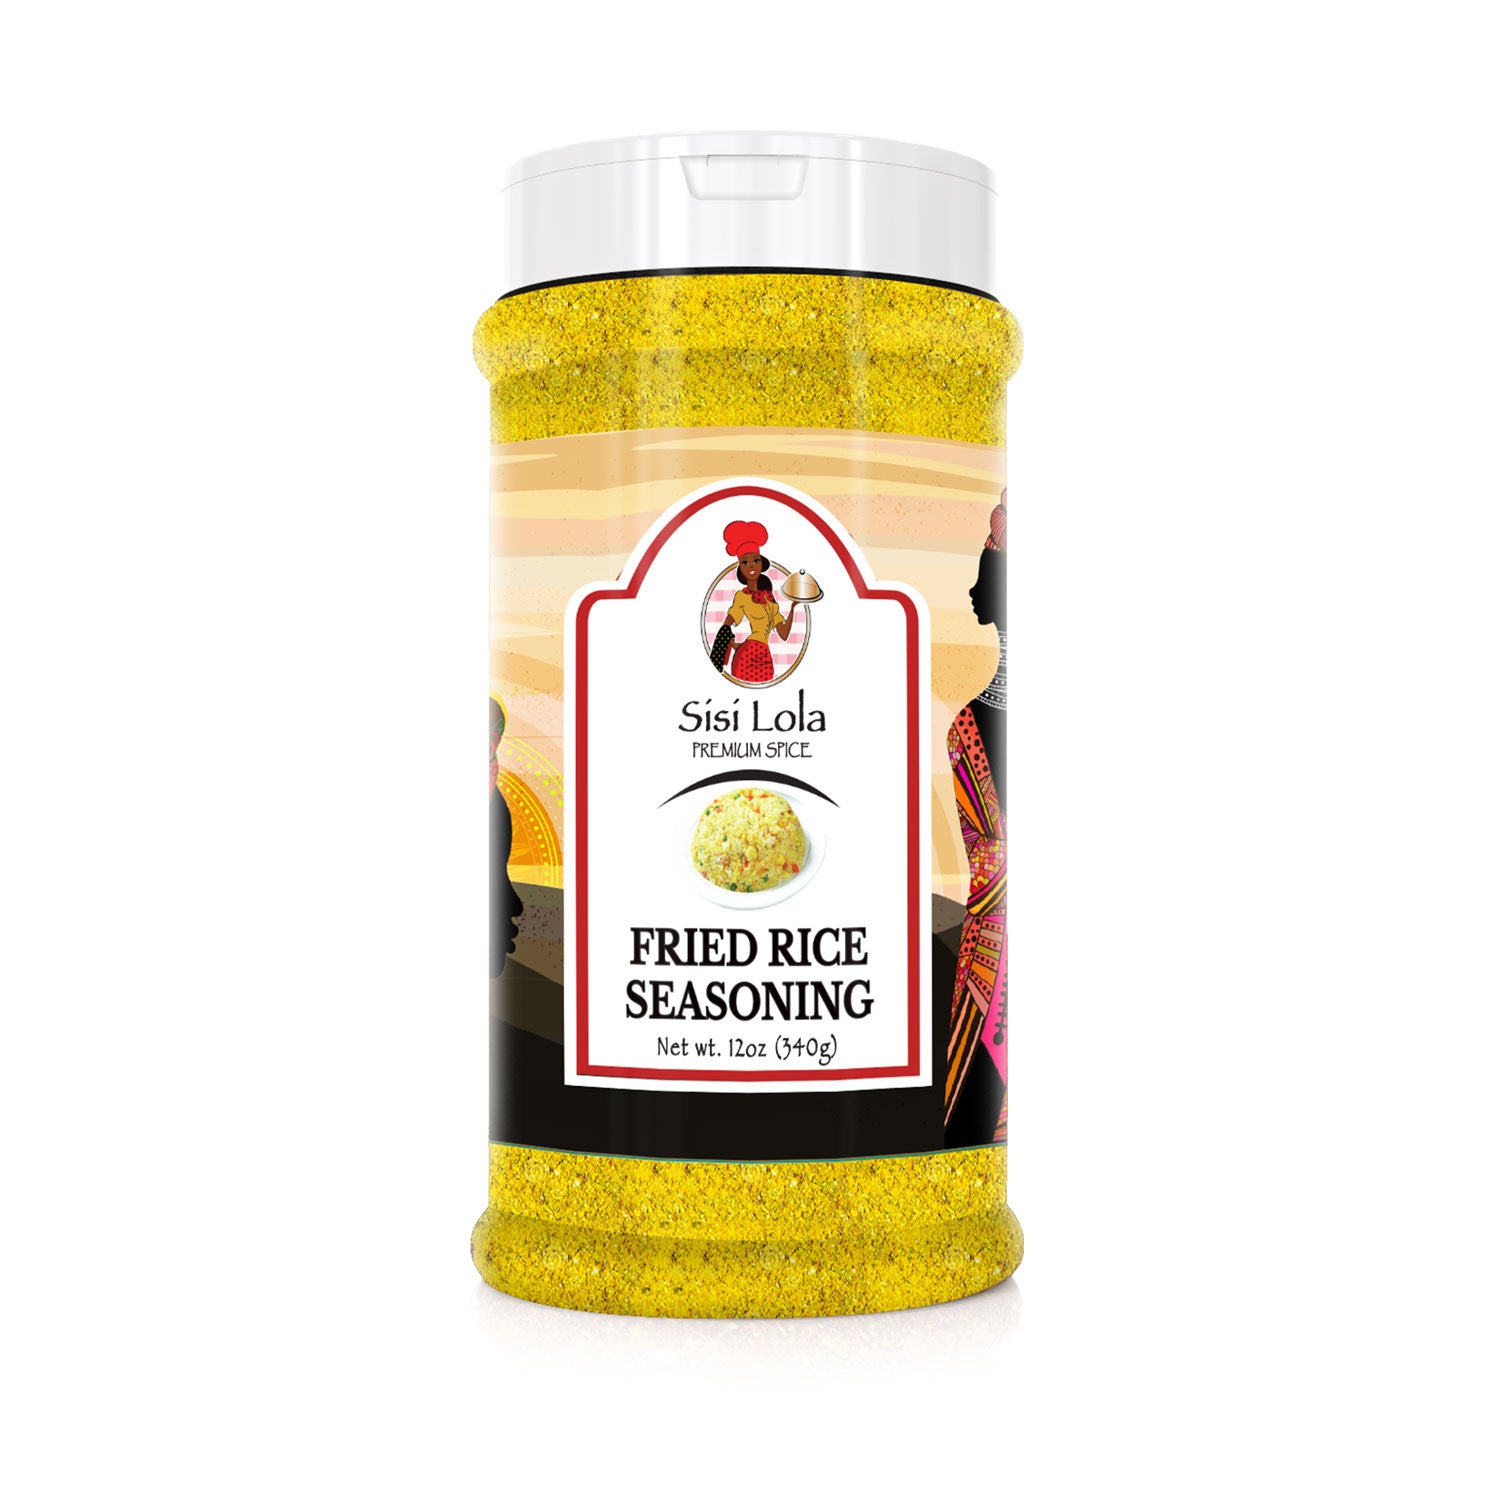 Sisi Lola Fried White Rice Seasoning - Adds A Mouthwatering Color and Taste to W